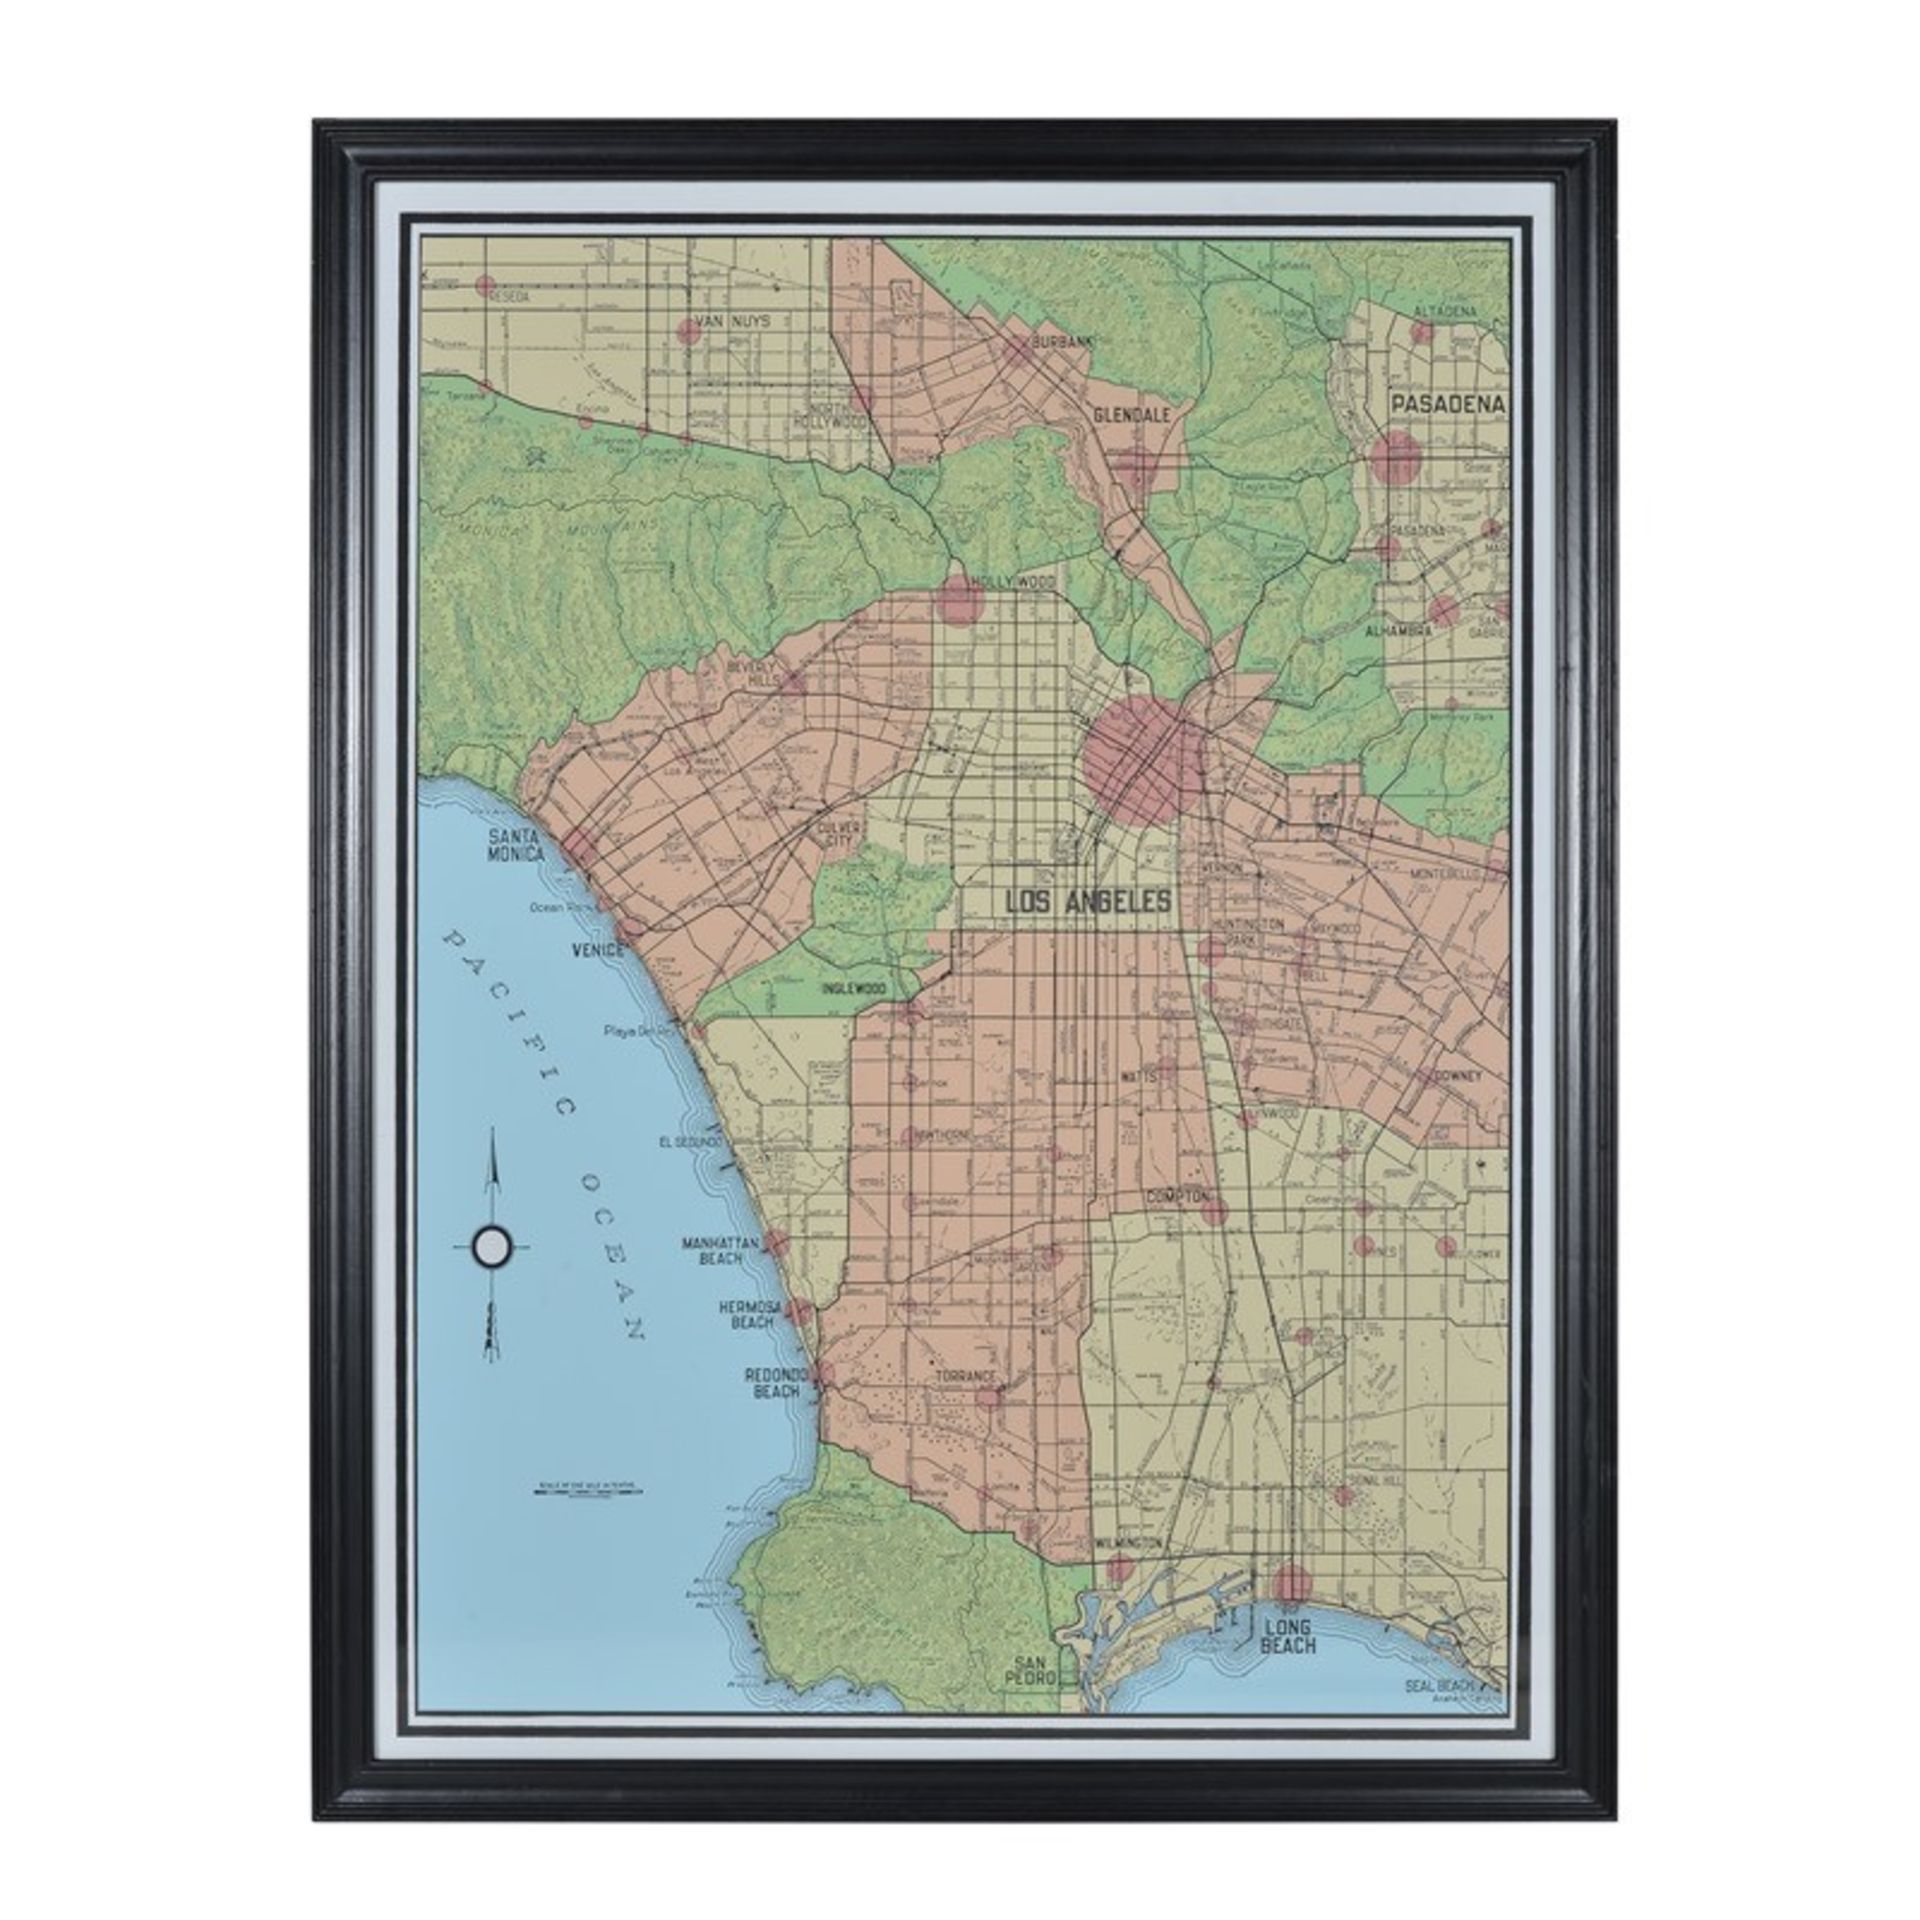 Capital Map Los Angeles These Unframed City Maps Pay Homage To Each City's History And The Life